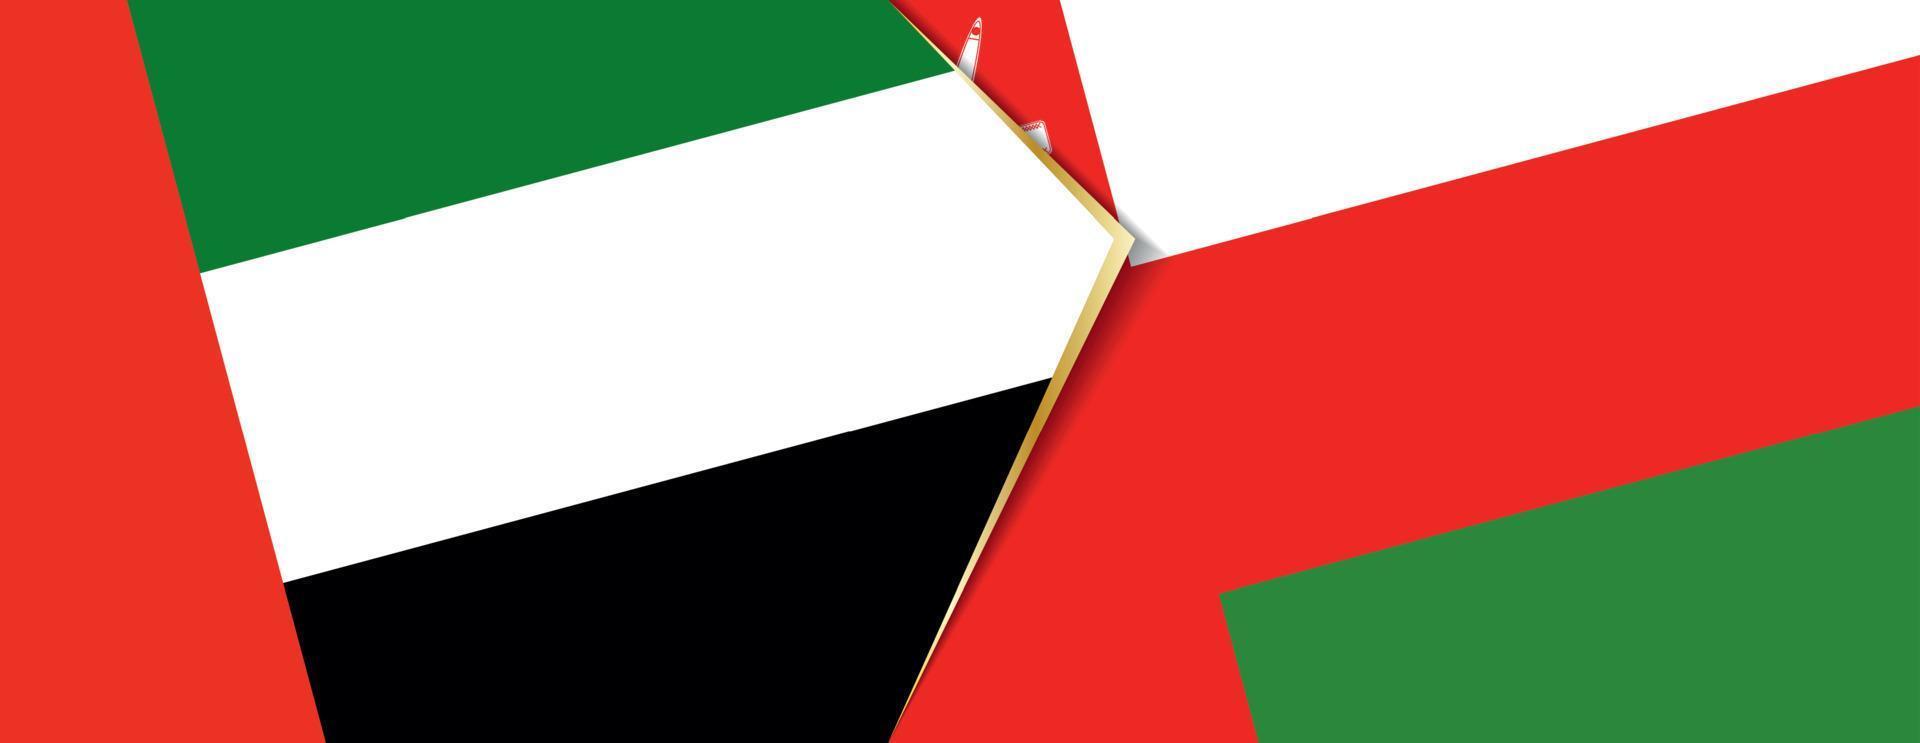 United Arab Emirates and Oman flags, two vector flags.